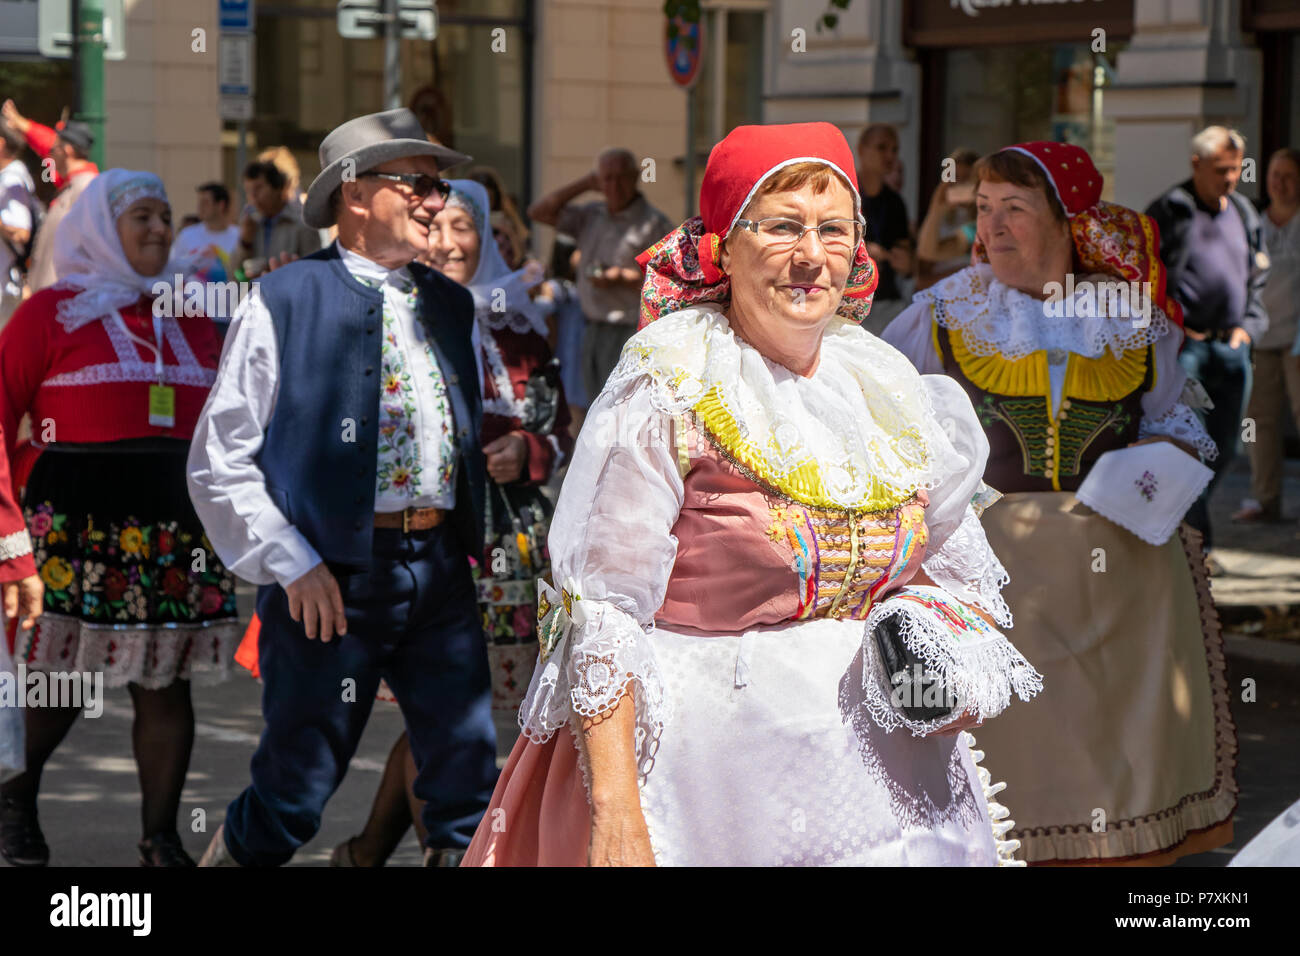 PRAGUE, CZECH REPUBLIC - JULY 1, 2018: People in folk costumes at Sokolsky Slet, a once-every-six-years gathering of the Sokol movement - a Czech spor Stock Photo